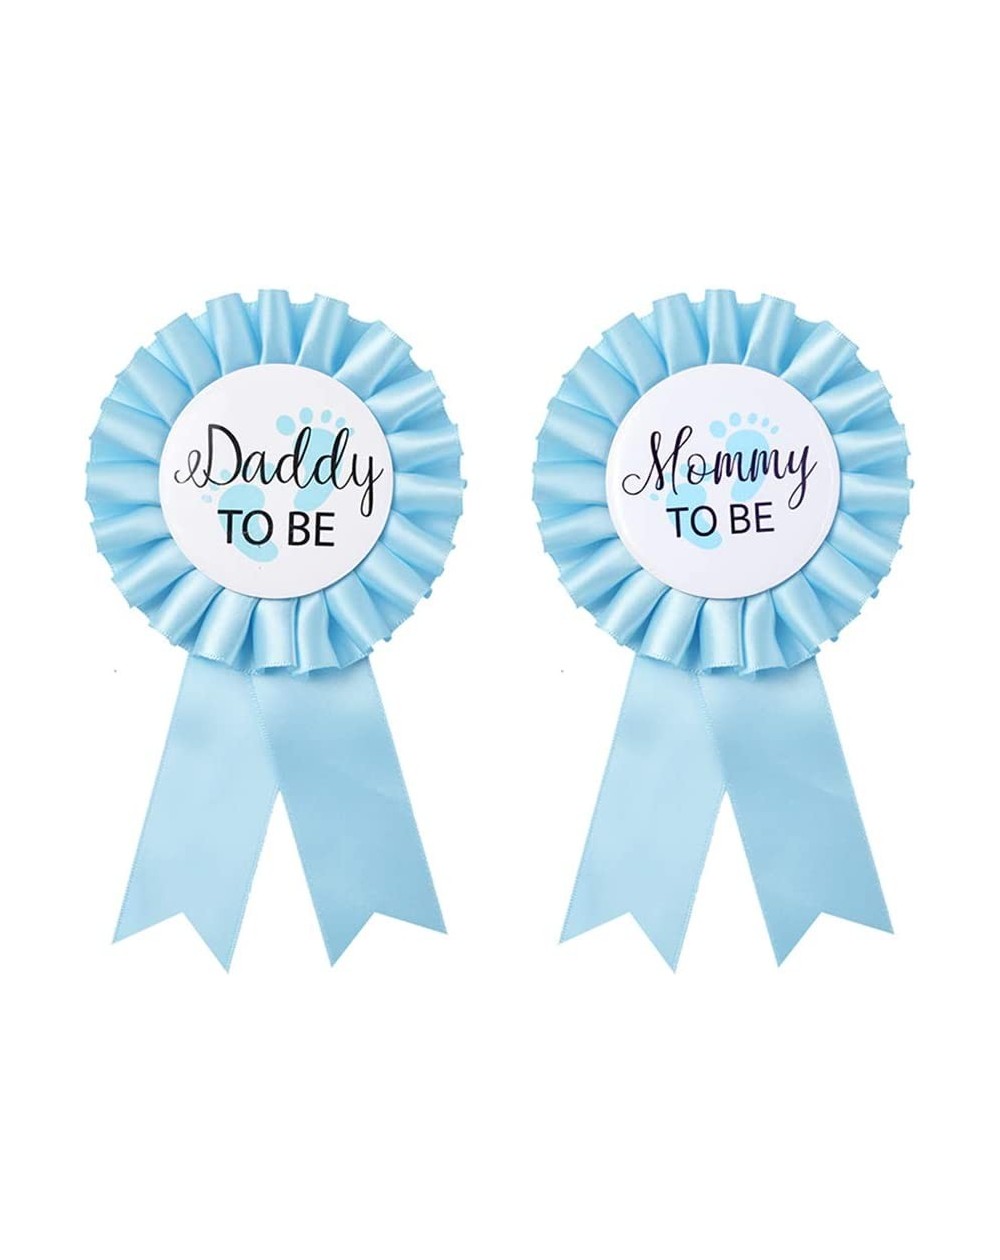 Favors Daddy to be & Mom to be Tinplate Badge Pin - Baby Shower Button New Dad Gifts Gender Reveals Party Baby Boy Blue Roset...